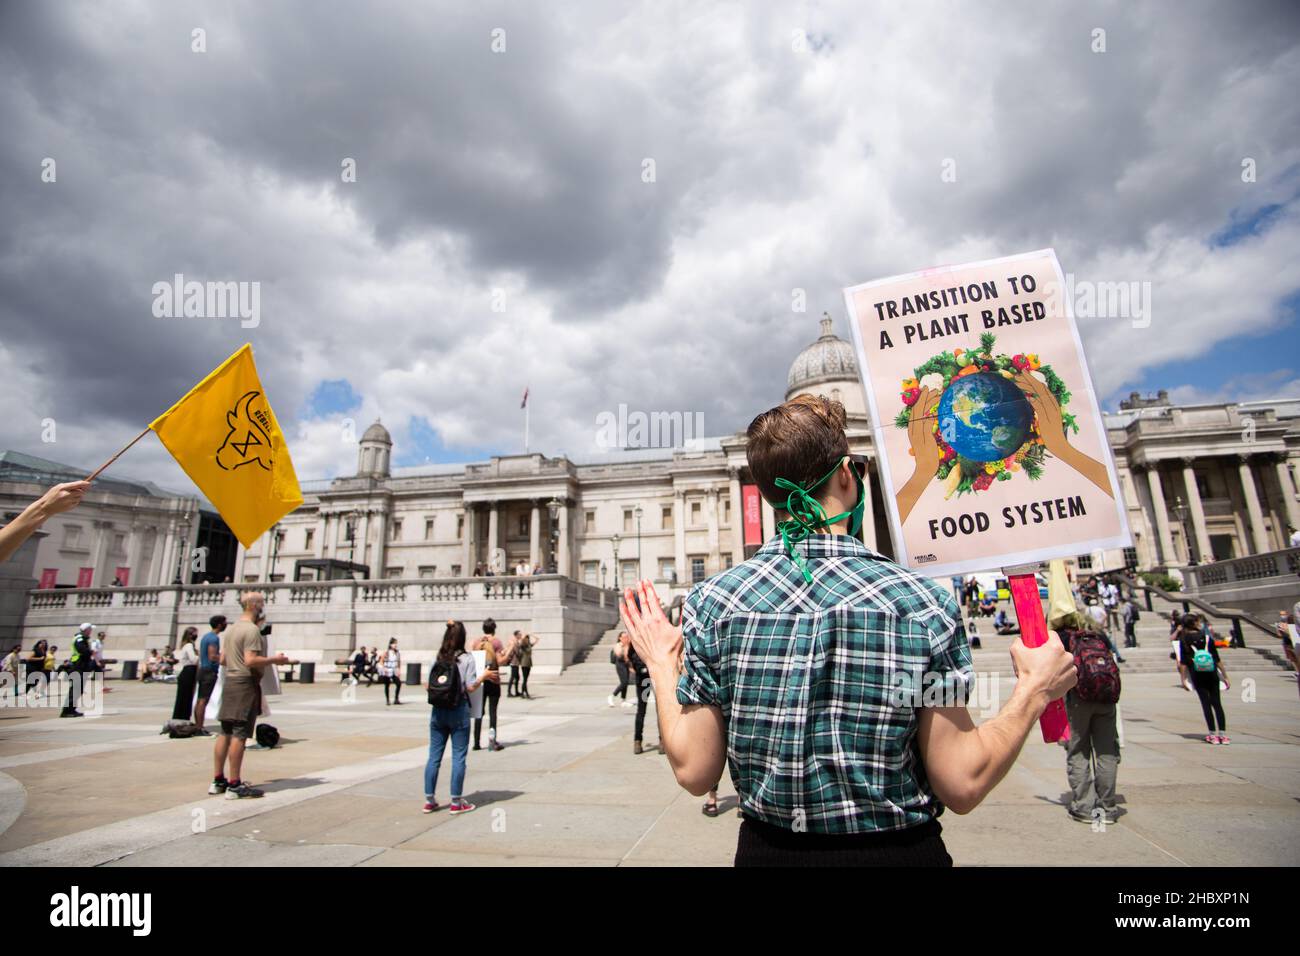 Animal Rebellion activists in Trafalgar Square holding placard Transition to a Plant Based Food System London 2020 Stock Photo